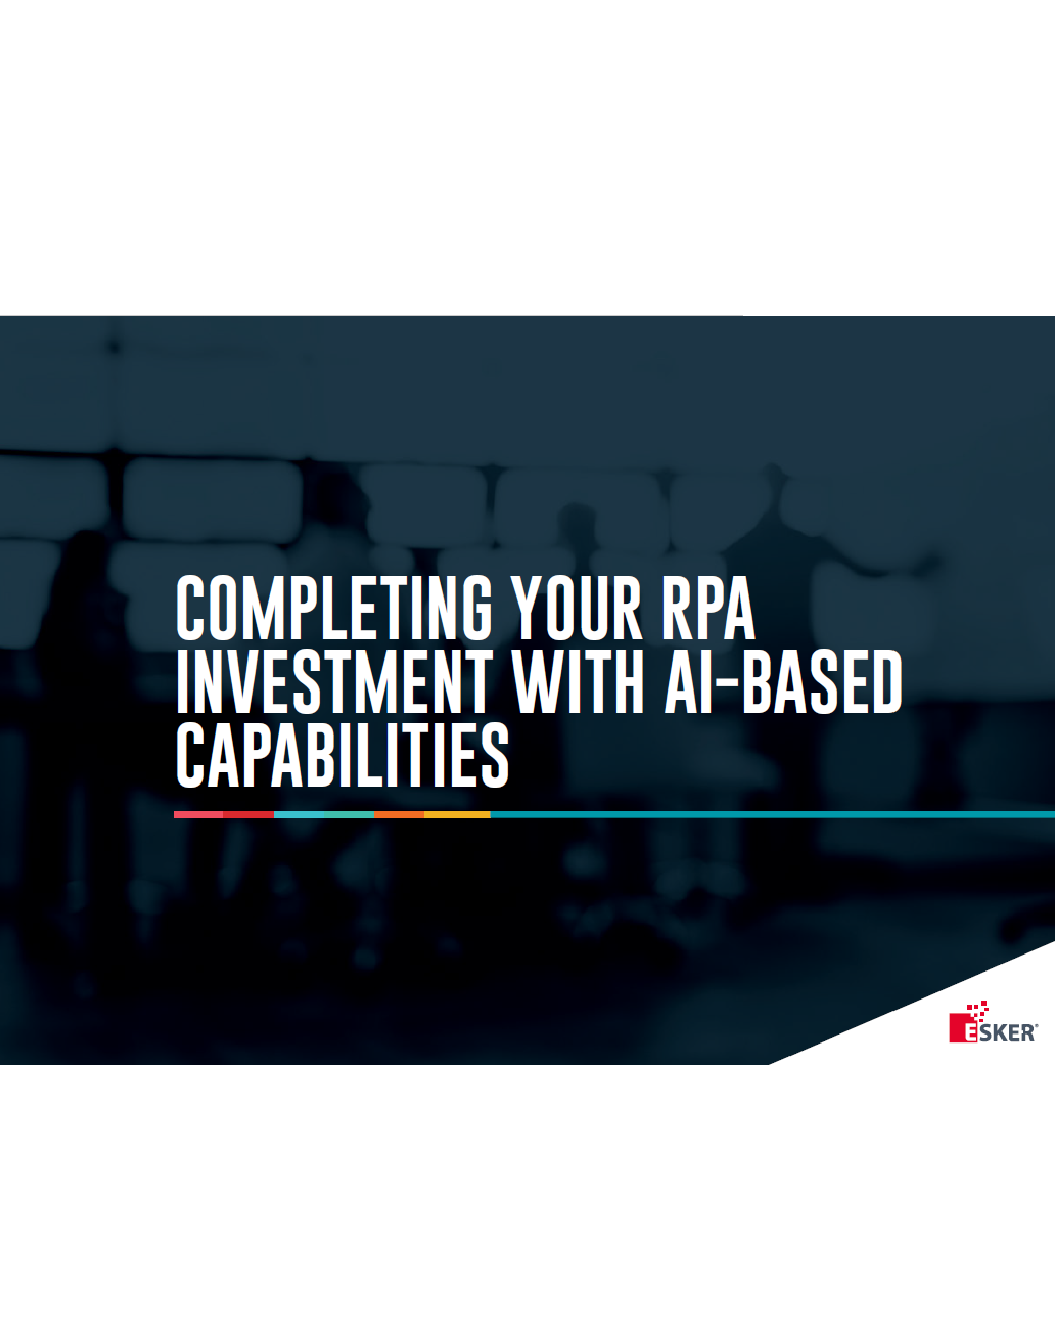 Completing your RPA investment with AI-based capabilities